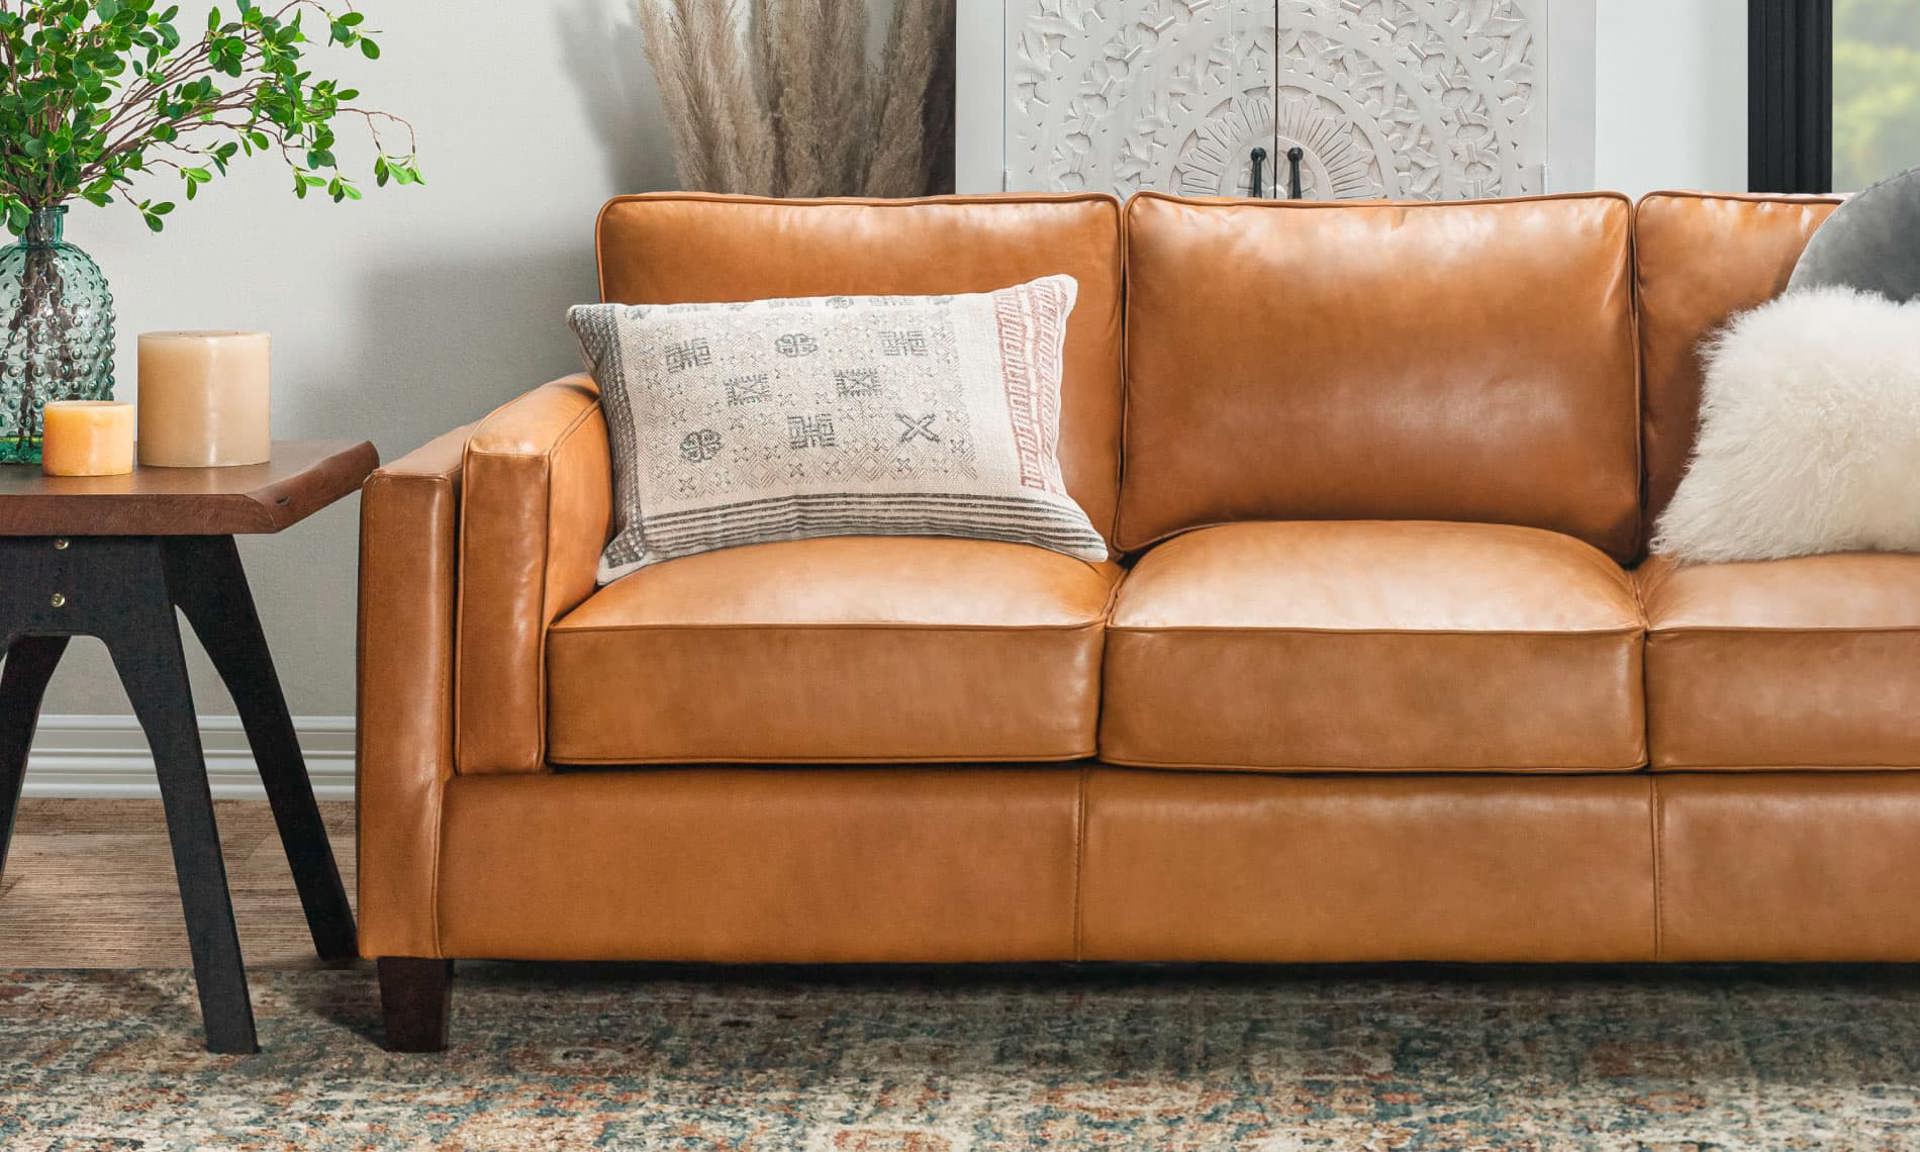 Rocky Mountain Leather sofa made of top-grain leather.